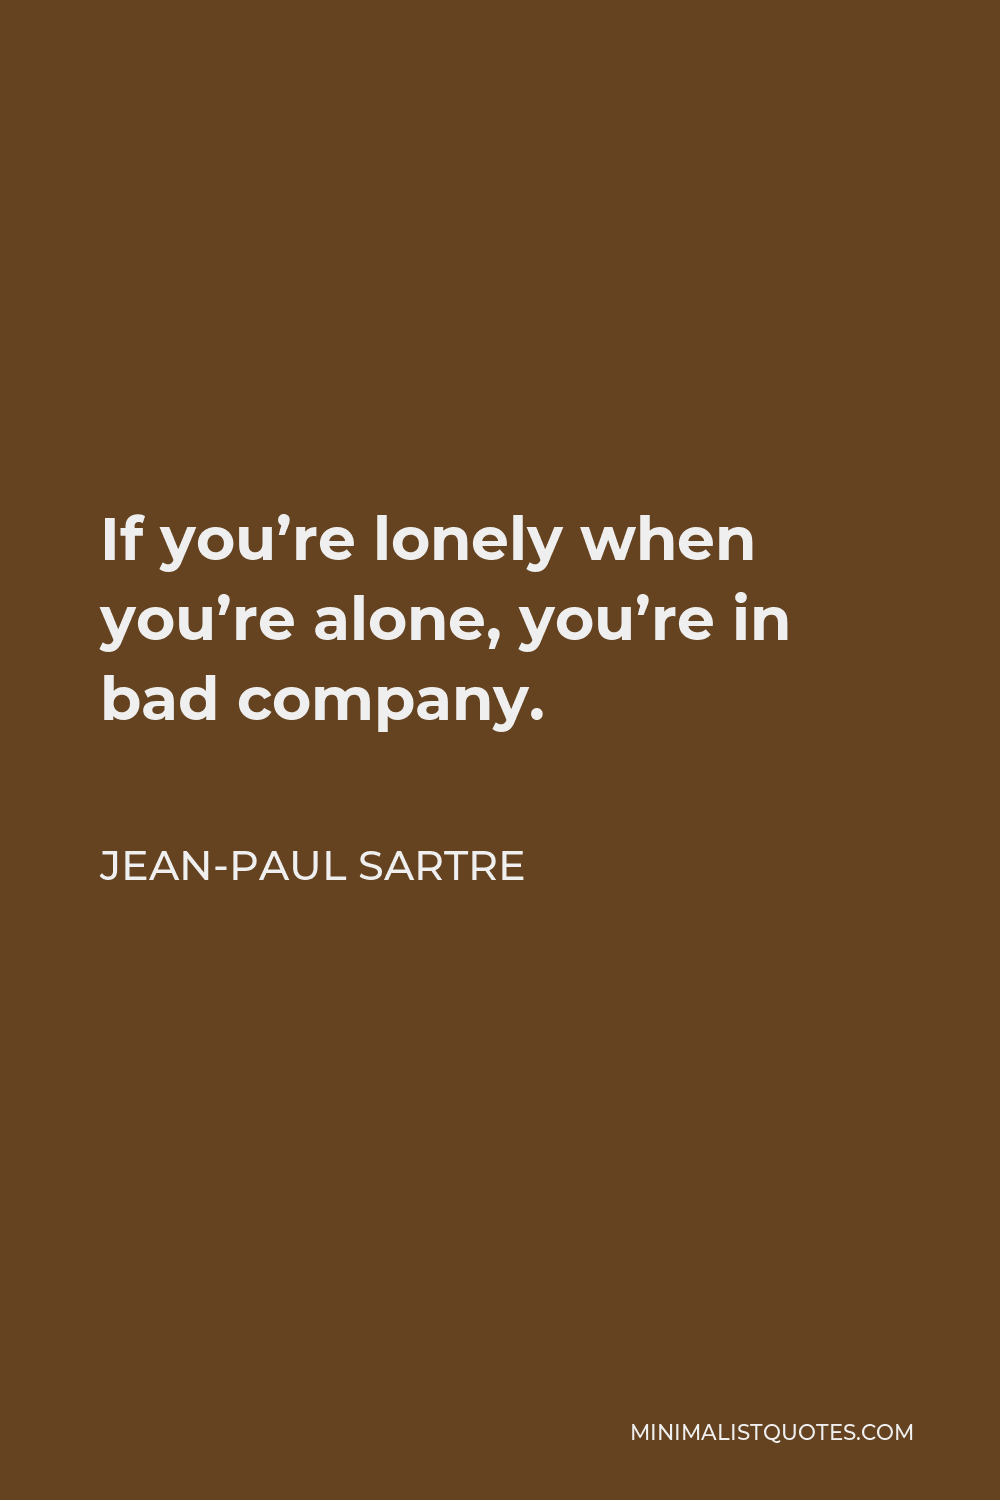 Jean-Paul Sartre Quote: If you're lonely when you're alone, you're in ...